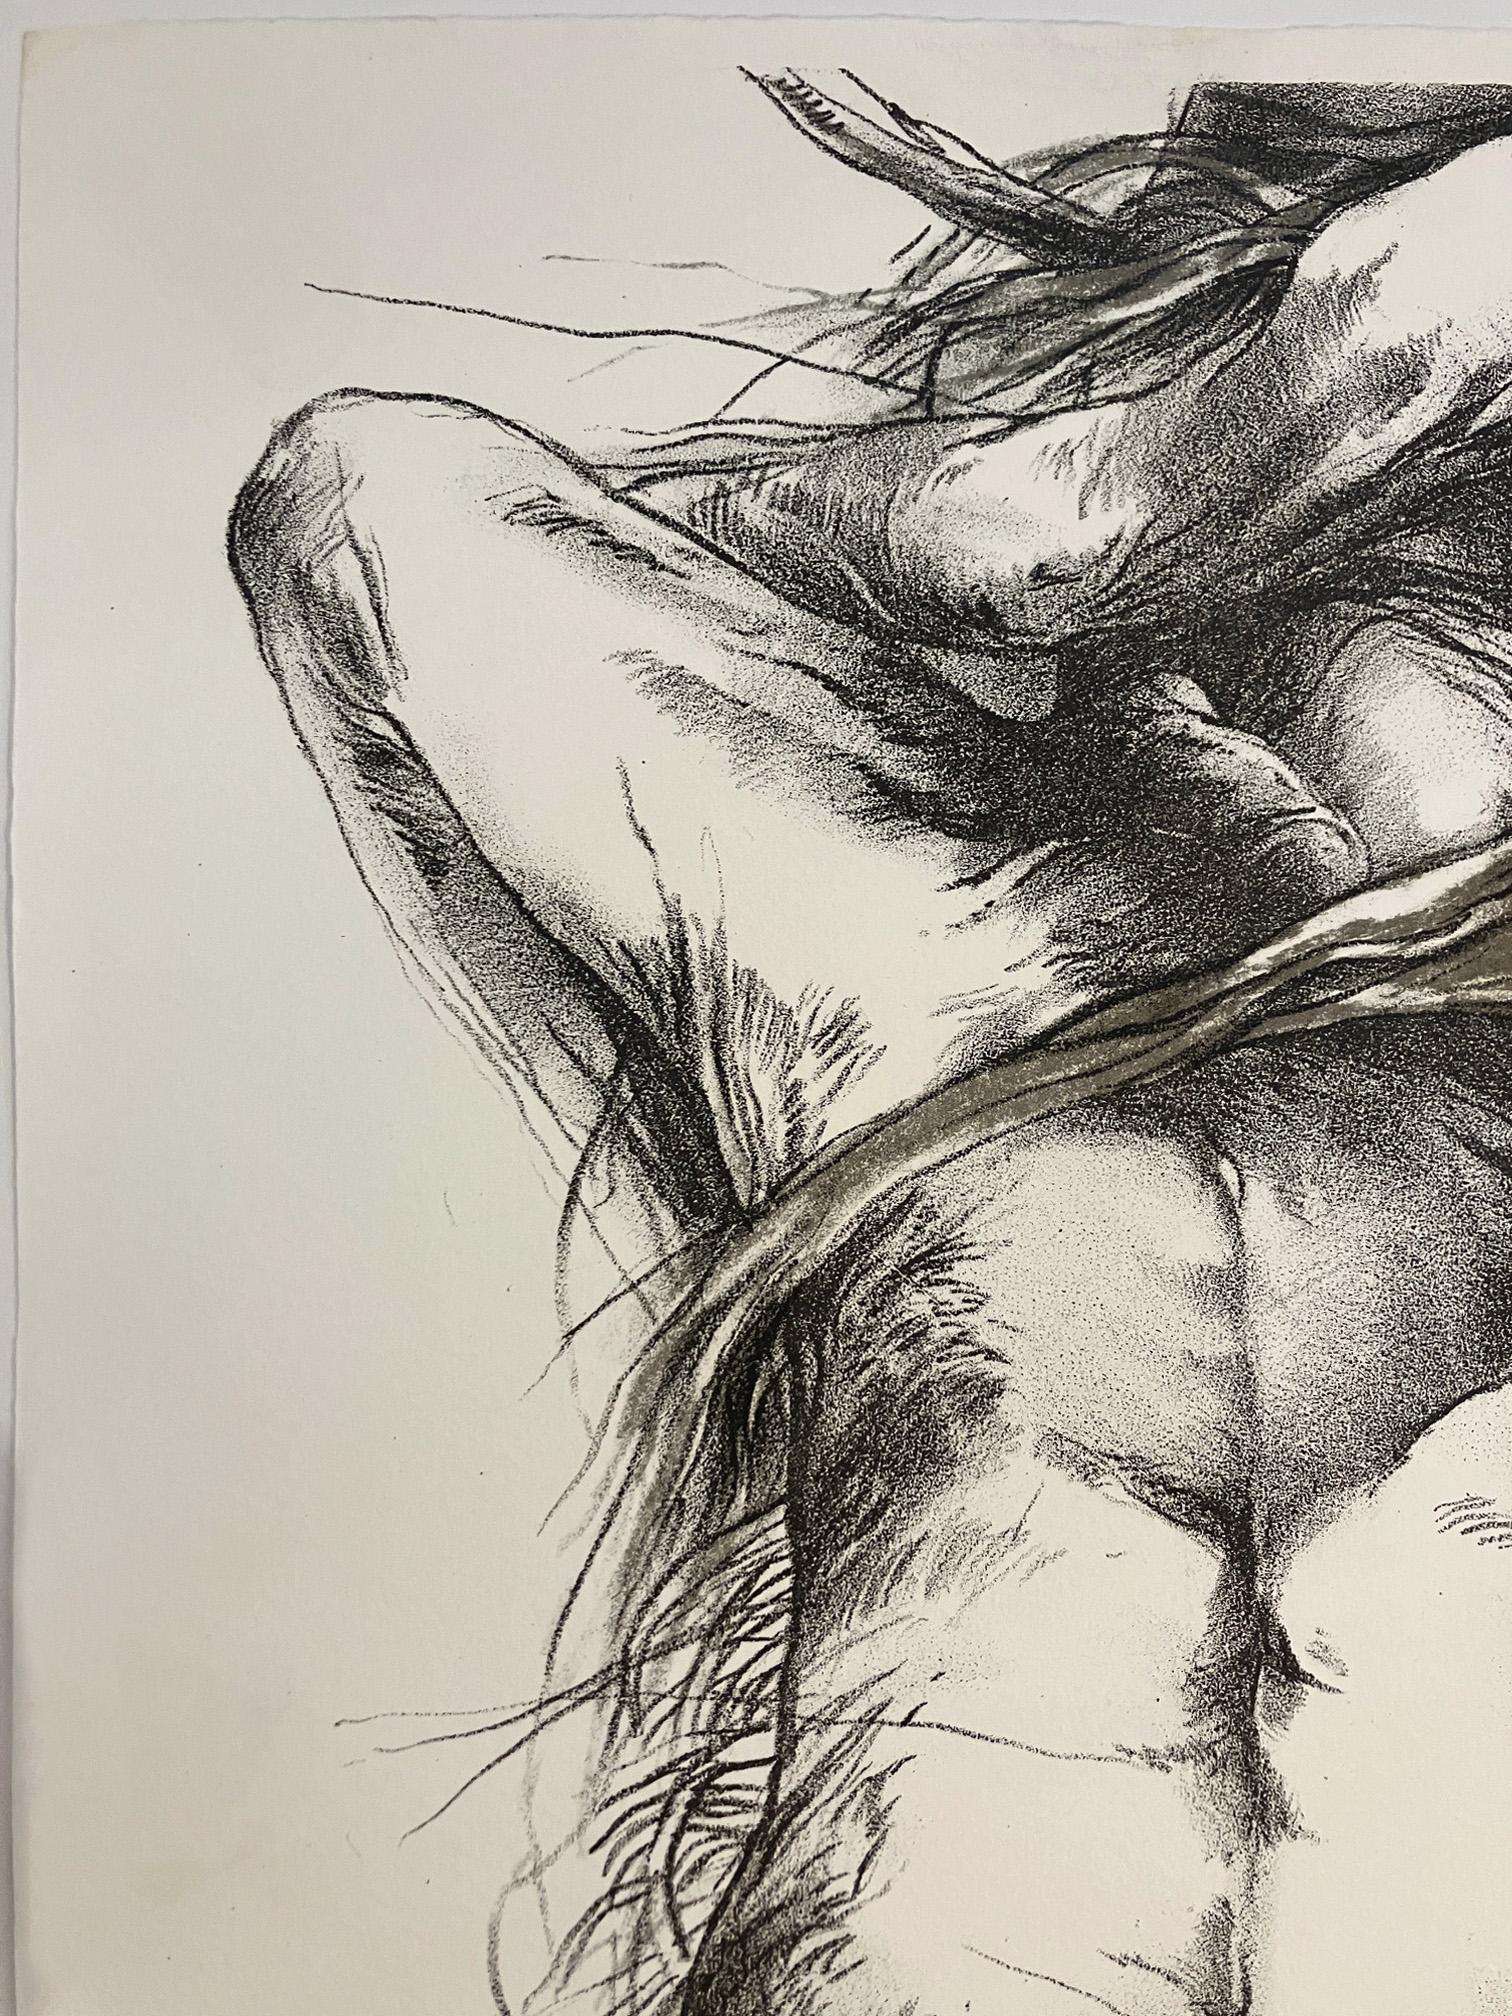 Unititled male nude by Luis Caballero
Lithography on paper
Limited edition print Edition 8/75
Size: 15 in H x 10.7 in W 
Signed in the lower right corner. Numbered in the lower left corner. Great condition with flaws. 
Provenance: Private